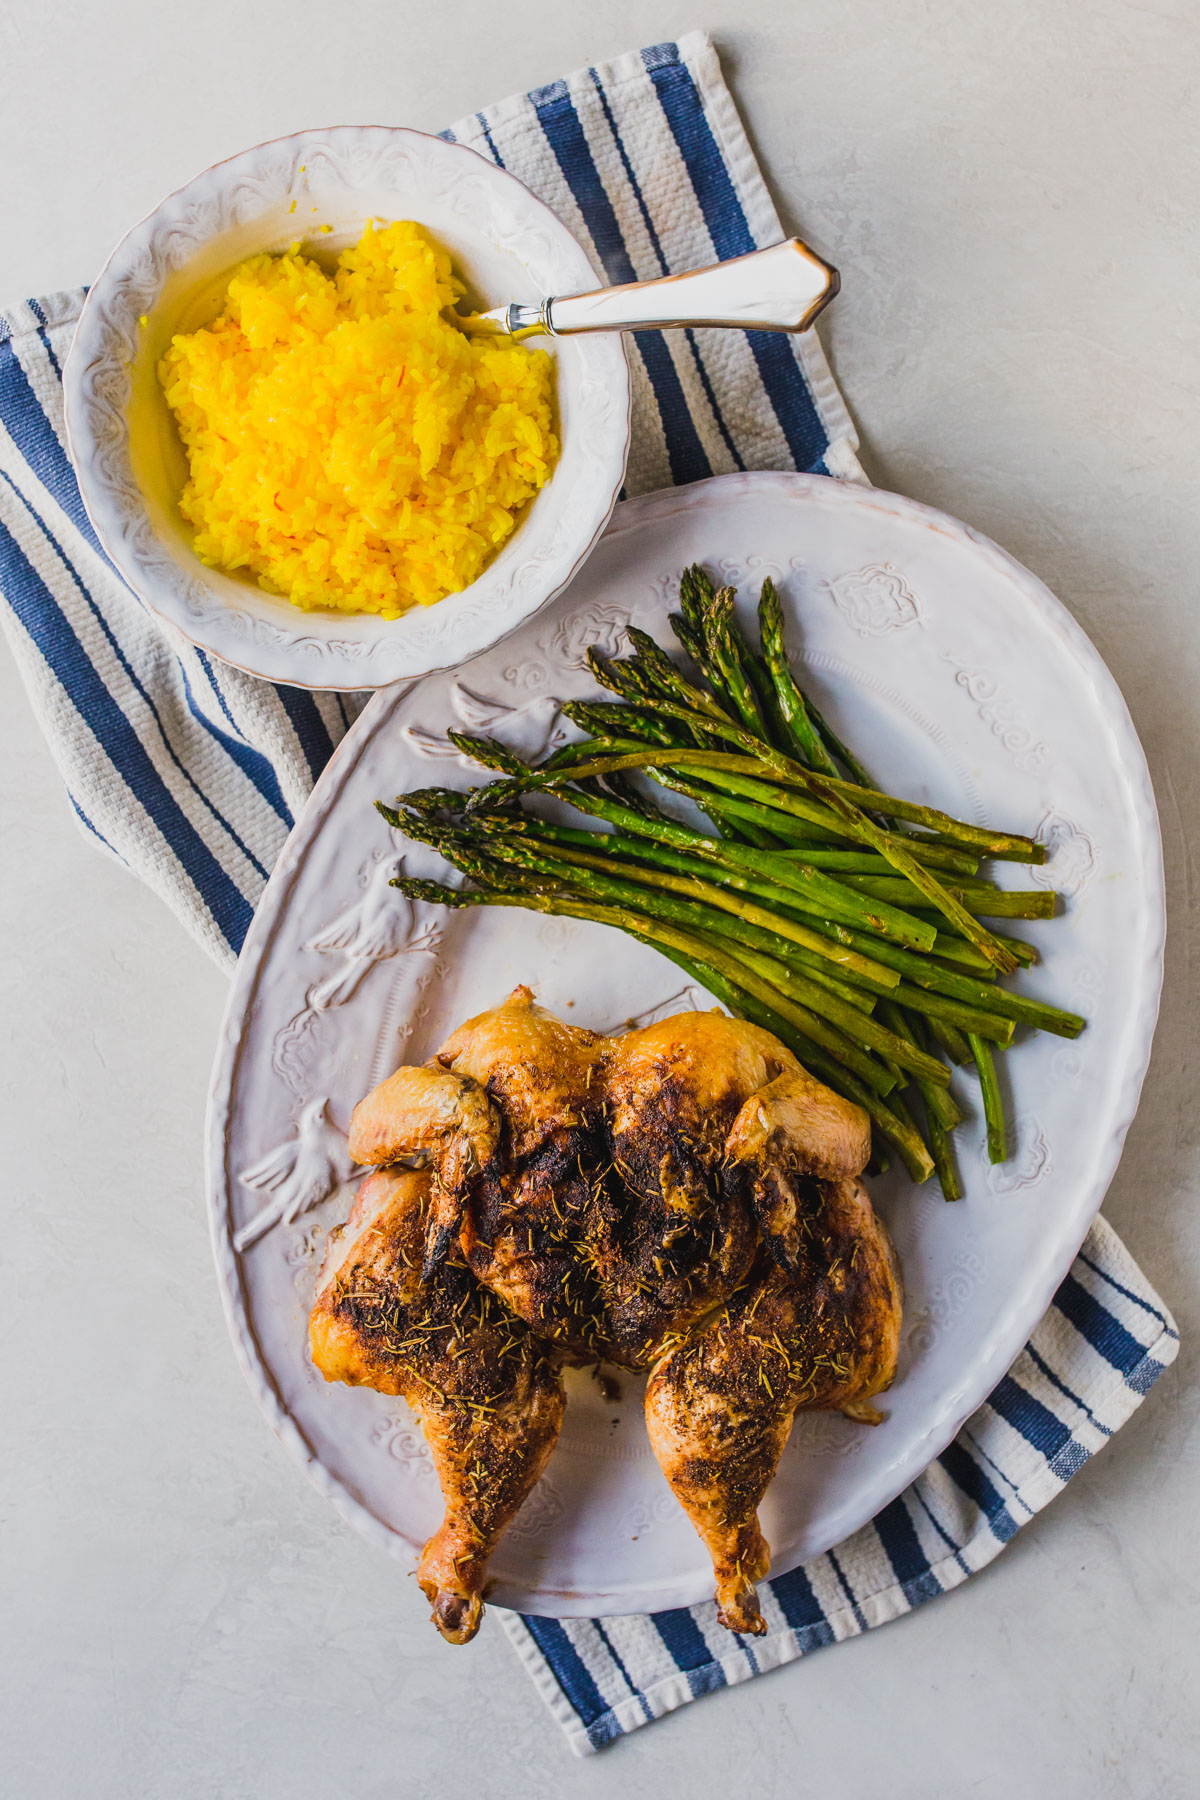 This easy oven roasted whole chicken is a perfect healthy dinner recipes for the family. I served it with easy saffron rice and oven roasted asparagus to keep the ingredients to a minimum. You probably already have the spices in your pantry too! Make easy homemade chicken stock from the bones for a a no waste recipe! Click through for the recipe for this whole roasted chicken with vegetables. #healthydinners #easydinnerideas